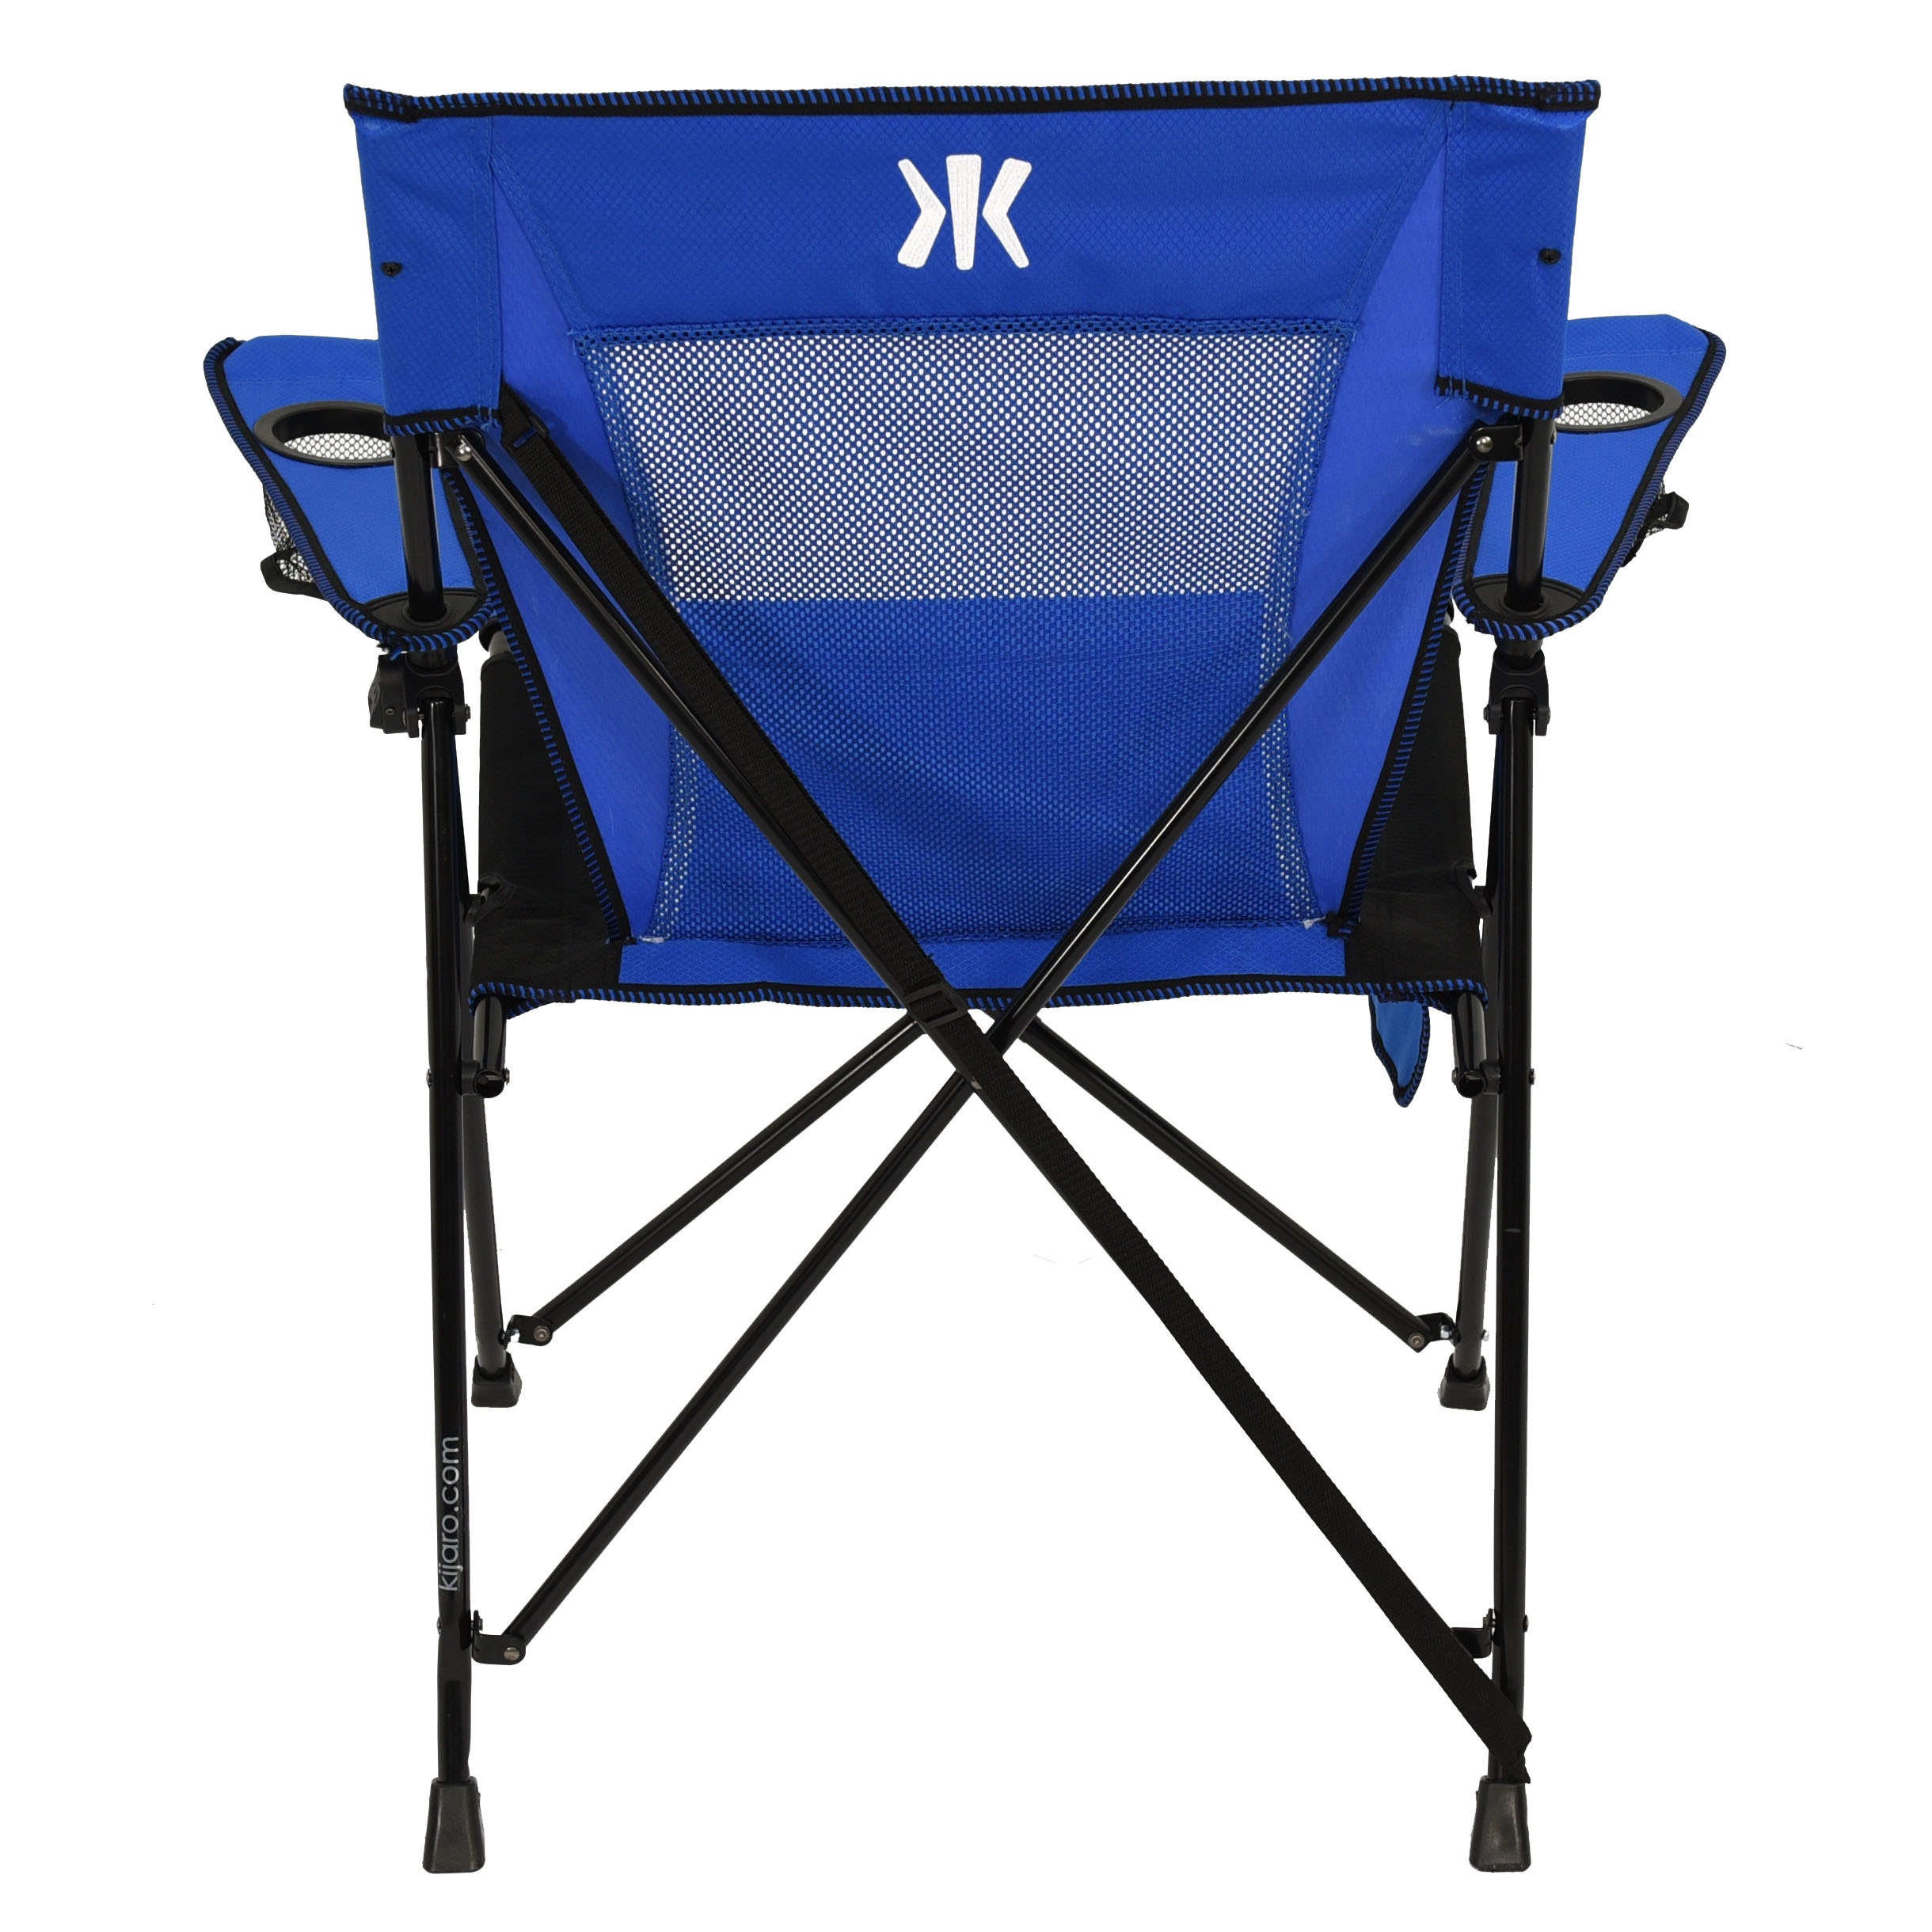 Kijaro Maldives Blue Recycled Repreve Fabric Dual Lock Camping Chair, 26 in. L x 35.5 in. W x 37 in" H, Weight 9.6 lbs. - image 3 of 3